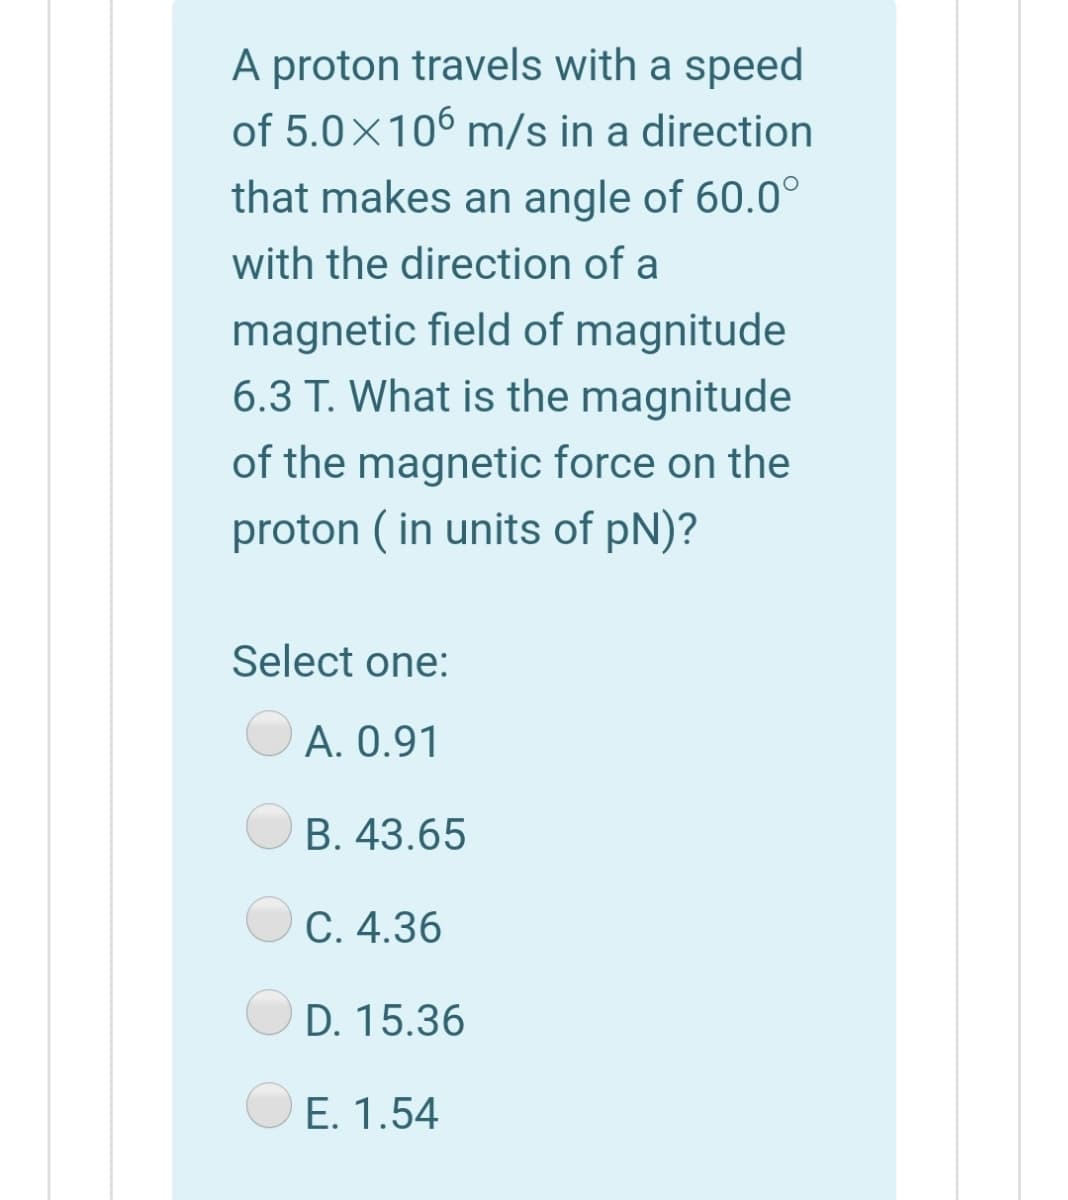 A proton travels with a speed
of 5.0×106 m/s in a direction
that makes an angle of 60.0°
with the direction of a
magnetic field of magnitude
6.3 T. What is the magnitude
of the magnetic force on the
proton ( in units of pN)?
Select one:
A. 0.91
B. 43.65
C. 4.36
D. 15.36
E. 1.54
